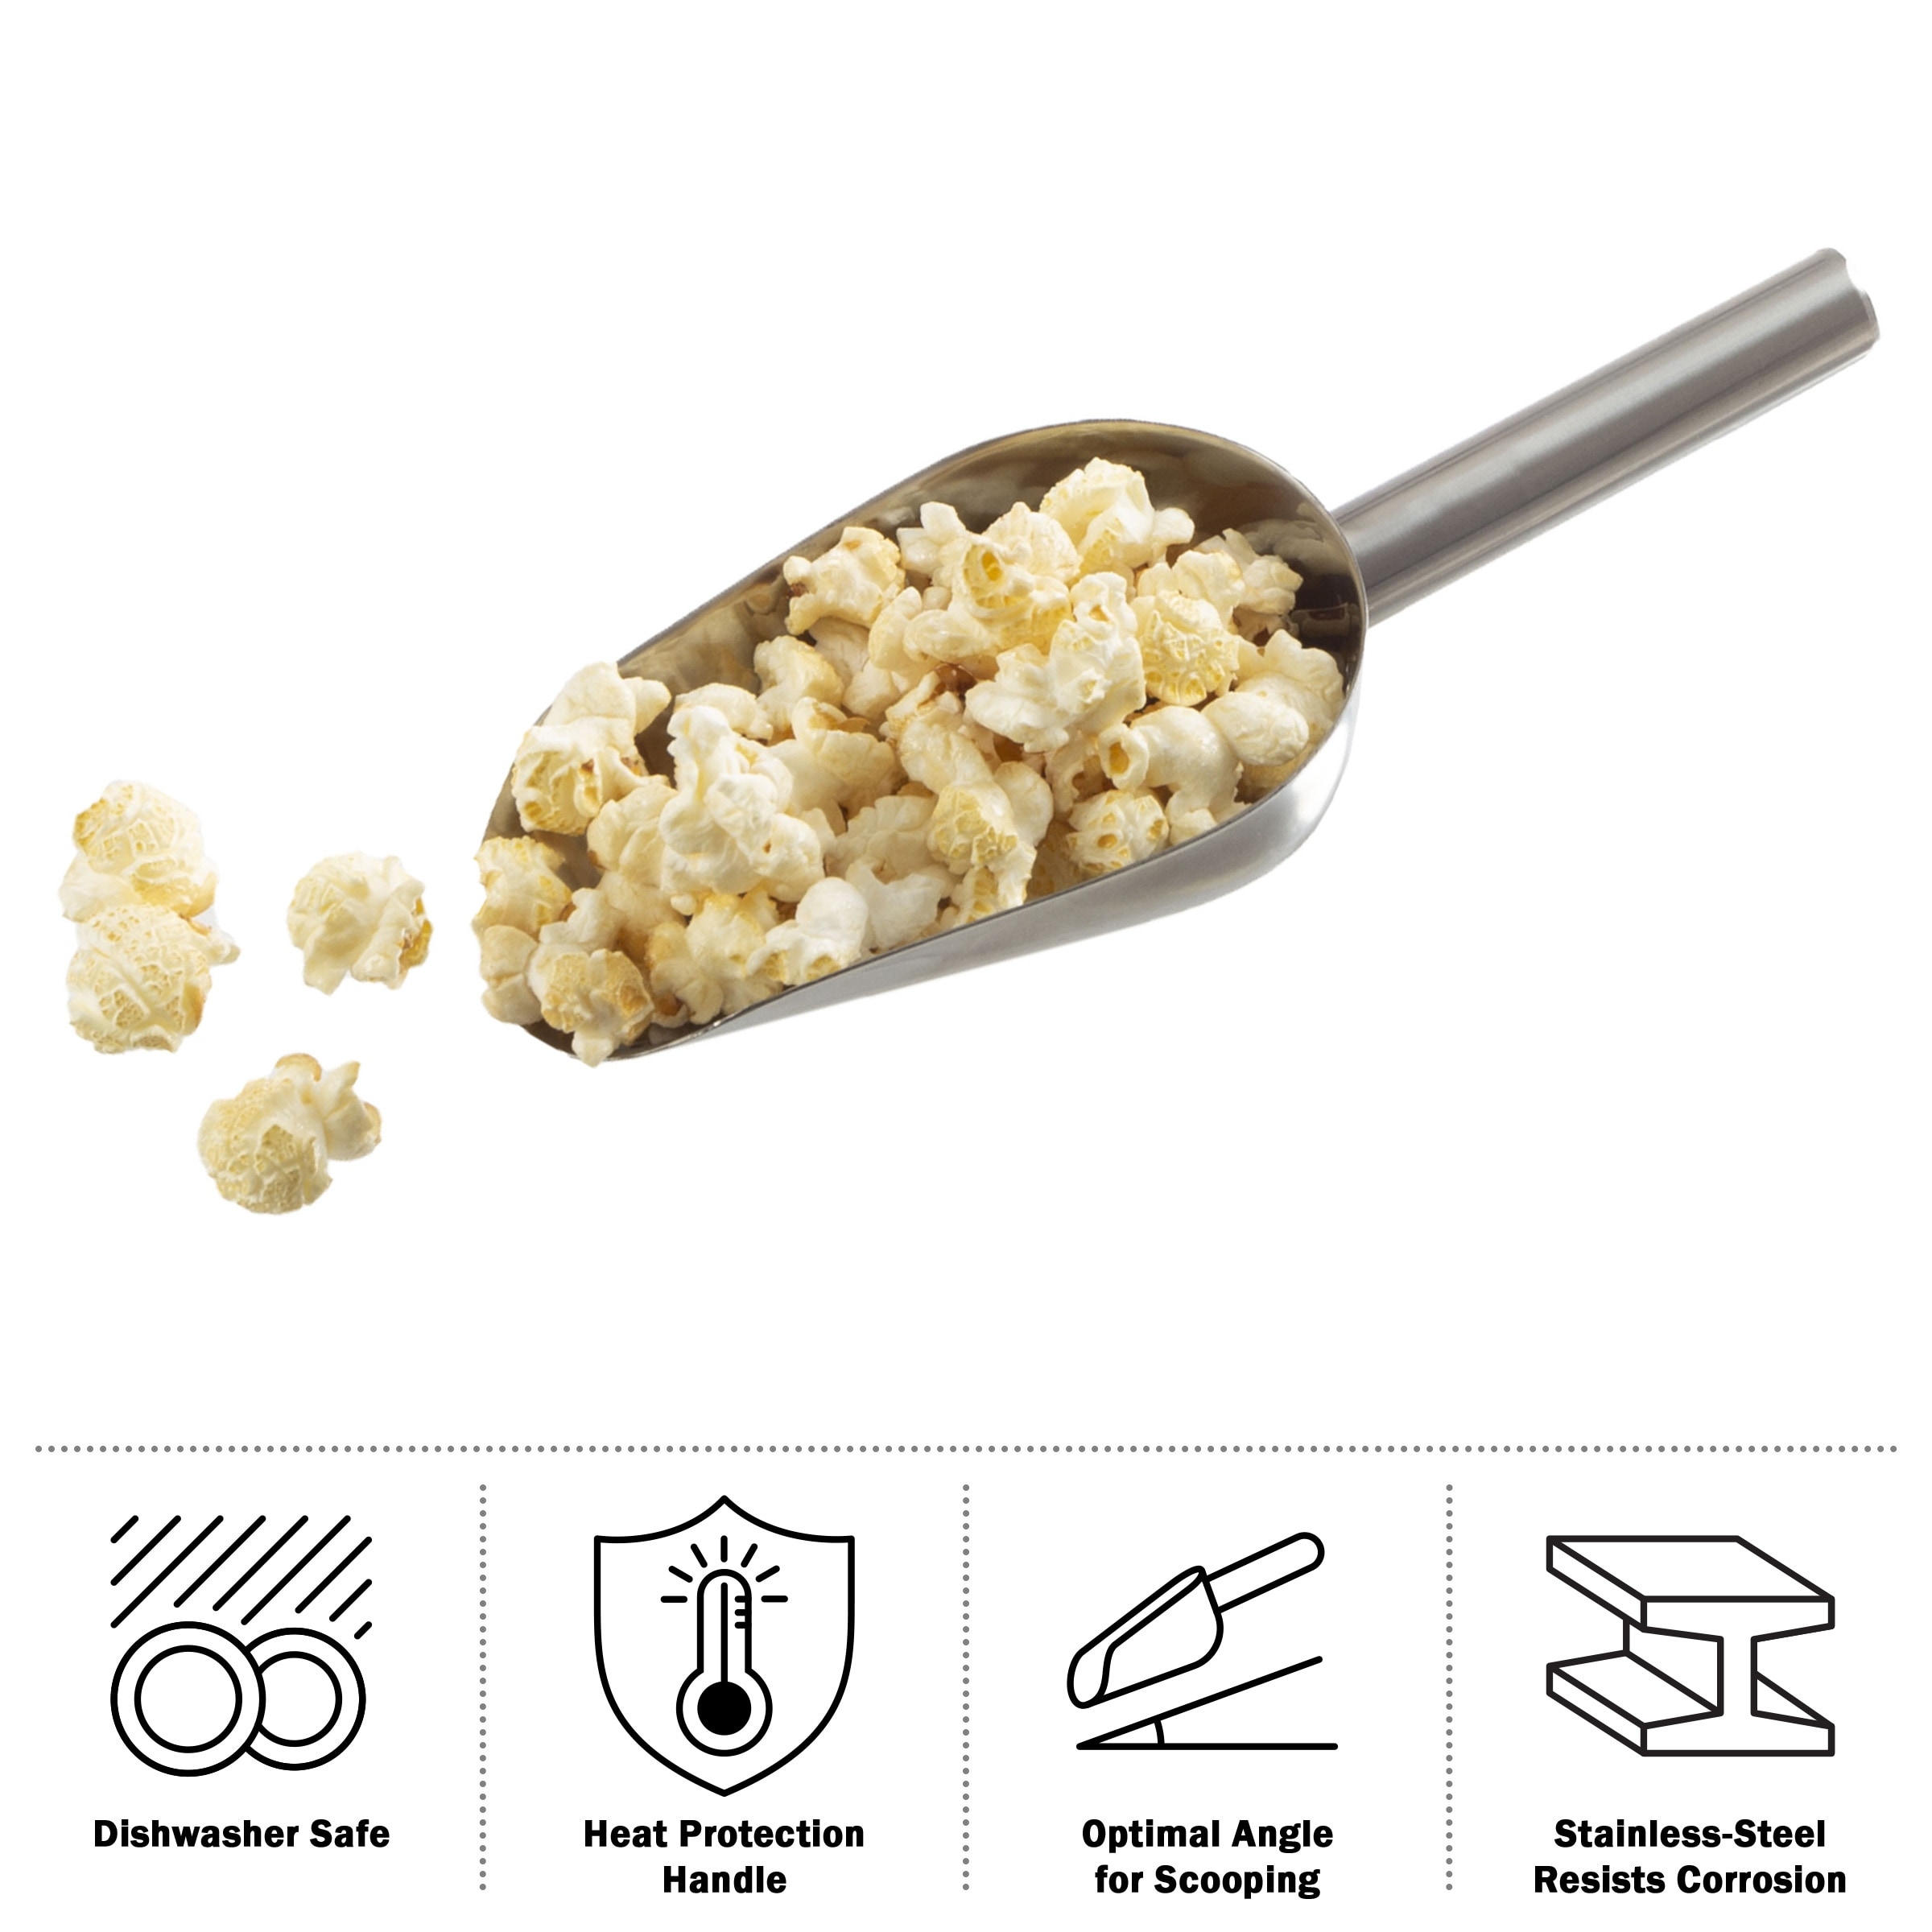 https://ak1.ostkcdn.com/images/products/is/images/direct/8fc0ba2829cb9eedbda947fd7b2ba5e877324035/Popcorn-Scoop-and-Seasoning-Shaker-Set-%E2%80%93-2-Piece-Serving-Accessories-Kit-by-Great-Northern-Popcorn-%28Single-Scoop%29.jpg